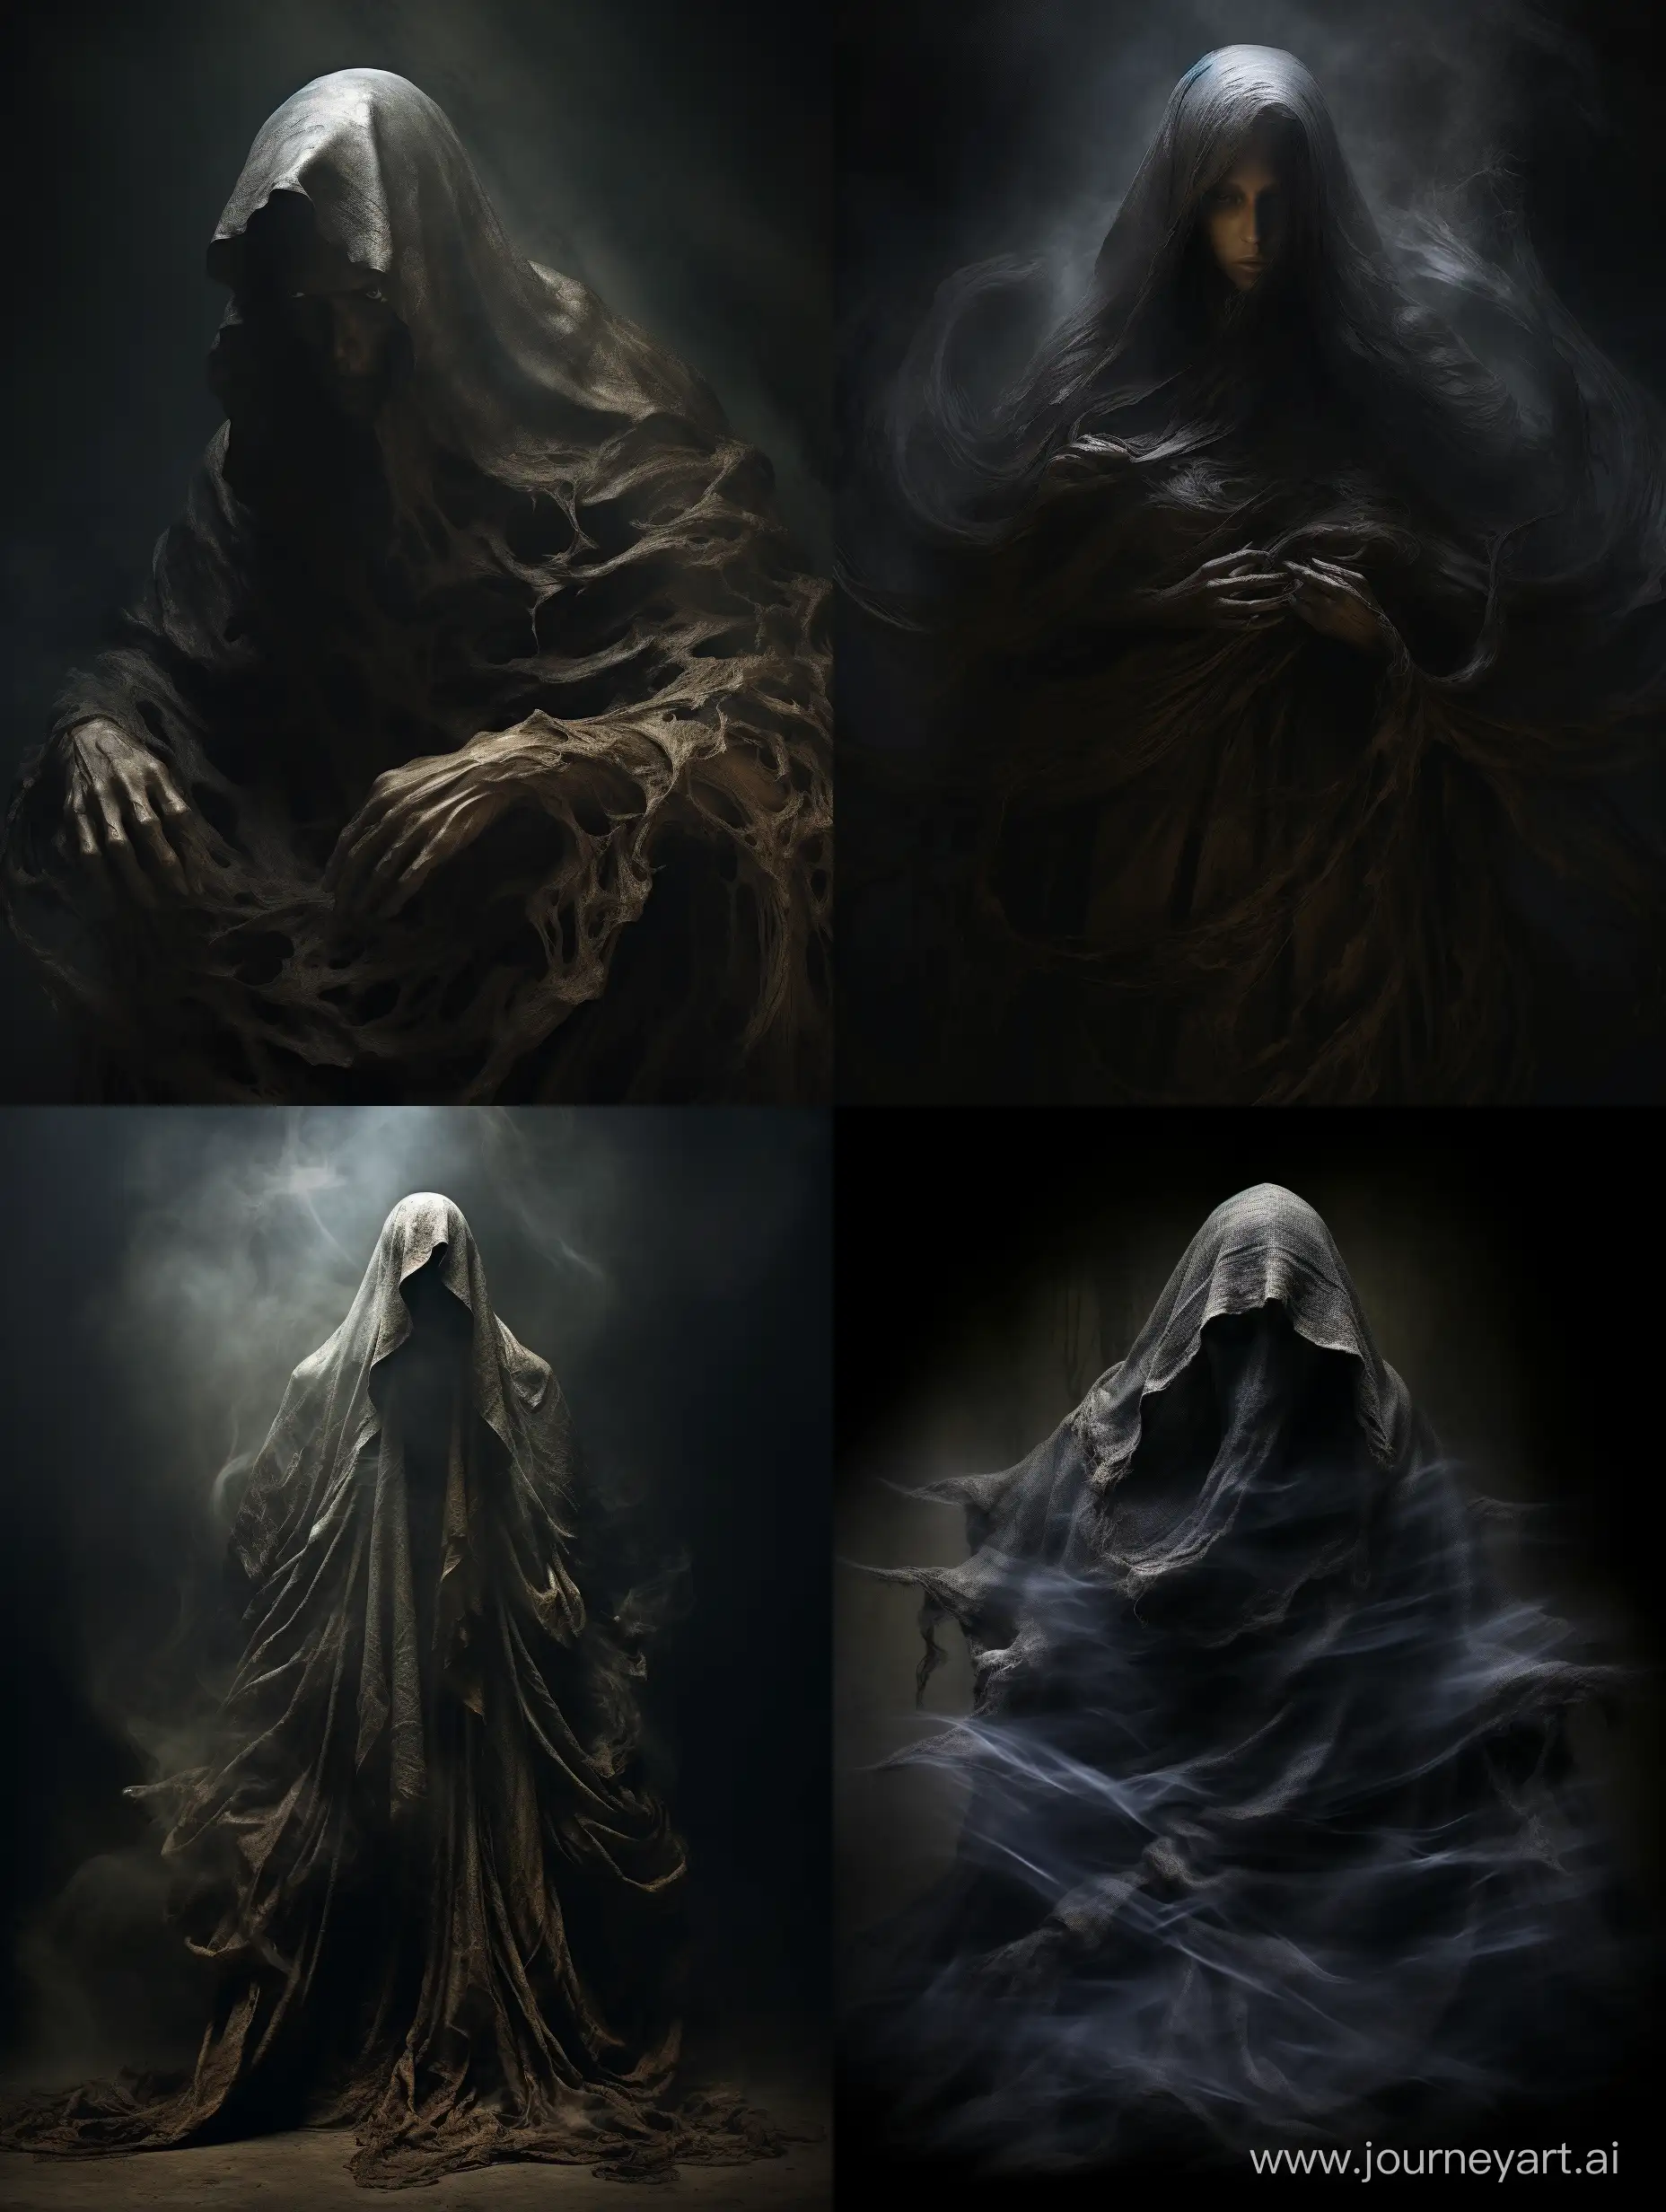 / imagination message: A haunting portrait of a spirit with a dark cloak covering its entire body and face. The atmosphere is haunting and sinister, and the lighting emphasizes the details of the cloak and the spirit's features. The image is of high quality, with intricate detail in the folds of the mantle and the facial features of the spirit. The spirit is shown in the foreground, with the cloak covering its entire body and face, leaving only its eyes visible. The cloak is dark and textured, with intricate patterns that add to the sinister atmosphere of the image. The background is simple, with a neutral color that emphasizes attention to the spirit and its characteristics. The composition is elegant and focuses on the haunting presence of the spirit. The image has a photorealistic quality that allows you to see every detail clearly, making it feel like a real portrait of a dark spirit. It is perfect for those who appreciate the disturbing and sinister quality of supernatural beings. --ar 3:4